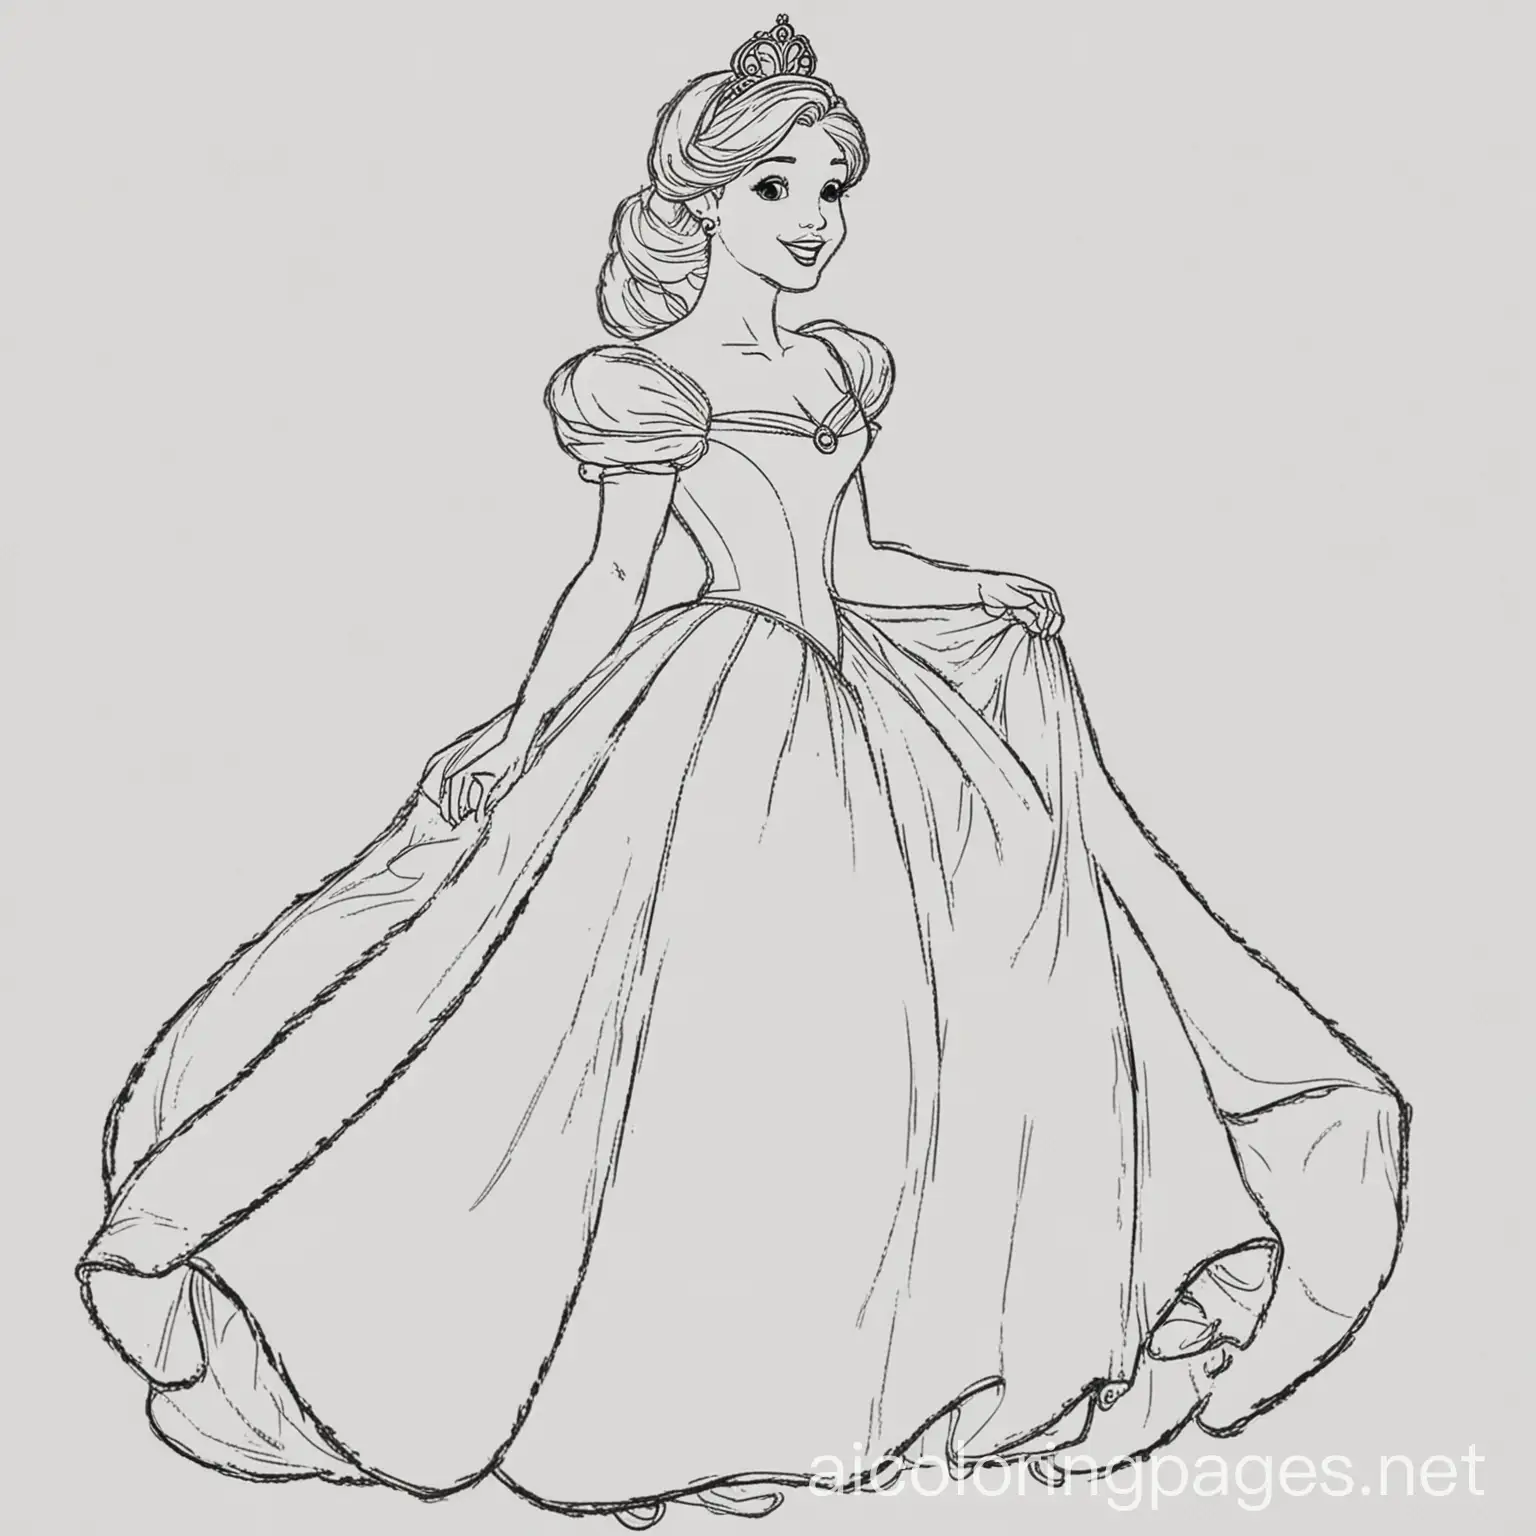 Cinderella, Coloring Page, black and white, line art, white background, Simplicity, Ample White Space. The background of the coloring page is plain white to make it easy for young children to color within the lines. The outlines of all the subjects are easy to distinguish, making it simple for kids to color without too much difficulty